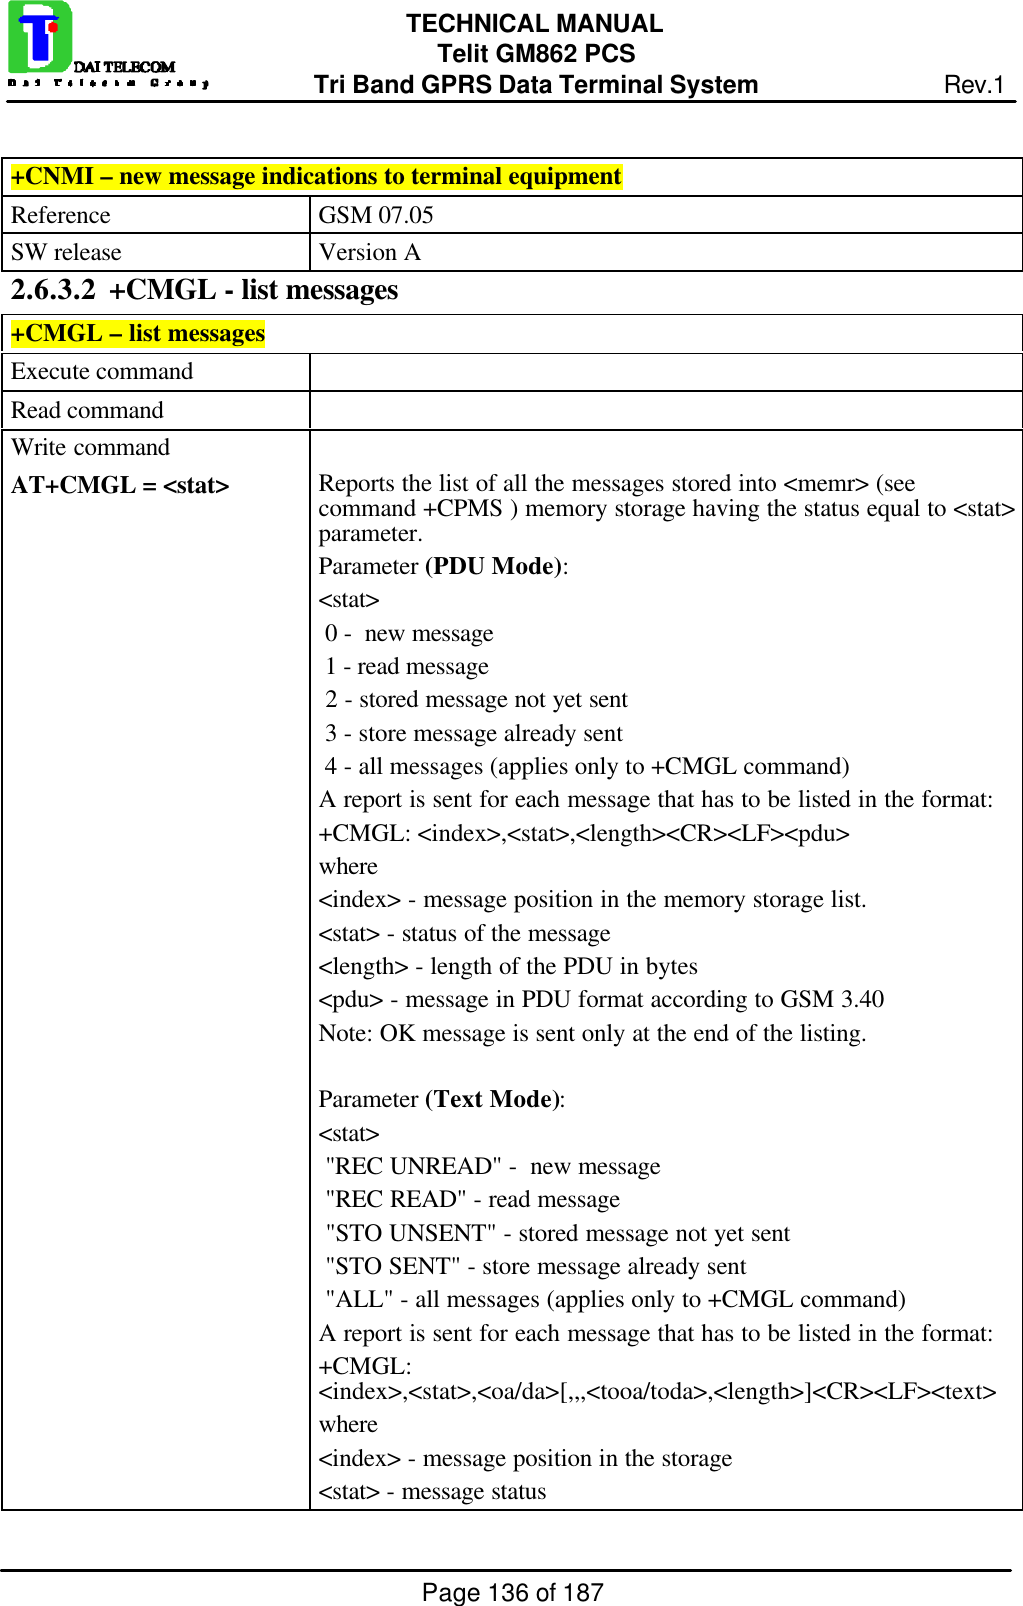 Page 136 of 187TECHNICAL MANUALTelit GM862 PCSTri Band GPRS Data Terminal System Rev.1+CNMI – new message indications to terminal equipmentReference GSM 07.05SW release Version A2.6.3.2  +CMGL - list messages+CMGL – list messagesExecute commandRead commandWrite commandAT+CMGL = &lt;stat&gt; Reports the list of all the messages stored into &lt;memr&gt; (seecommand +CPMS ) memory storage having the status equal to &lt;stat&gt;parameter.Parameter (PDU Mode):&lt;stat&gt; 0 -  new message 1 - read message 2 - stored message not yet sent 3 - store message already sent 4 - all messages (applies only to +CMGL command)A report is sent for each message that has to be listed in the format:+CMGL: &lt;index&gt;,&lt;stat&gt;,&lt;length&gt;&lt;CR&gt;&lt;LF&gt;&lt;pdu&gt;where&lt;index&gt; - message position in the memory storage list.&lt;stat&gt; - status of the message&lt;length&gt; - length of the PDU in bytes&lt;pdu&gt; - message in PDU format according to GSM 3.40Note: OK message is sent only at the end of the listing.Parameter (Text Mode):&lt;stat&gt; &quot;REC UNREAD&quot; -  new message &quot;REC READ&quot; - read message &quot;STO UNSENT&quot; - stored message not yet sent &quot;STO SENT&quot; - store message already sent &quot;ALL&quot; - all messages (applies only to +CMGL command)A report is sent for each message that has to be listed in the format:+CMGL:&lt;index&gt;,&lt;stat&gt;,&lt;oa/da&gt;[,,,&lt;tooa/toda&gt;,&lt;length&gt;]&lt;CR&gt;&lt;LF&gt;&lt;text&gt;where&lt;index&gt; - message position in the storage&lt;stat&gt; - message status